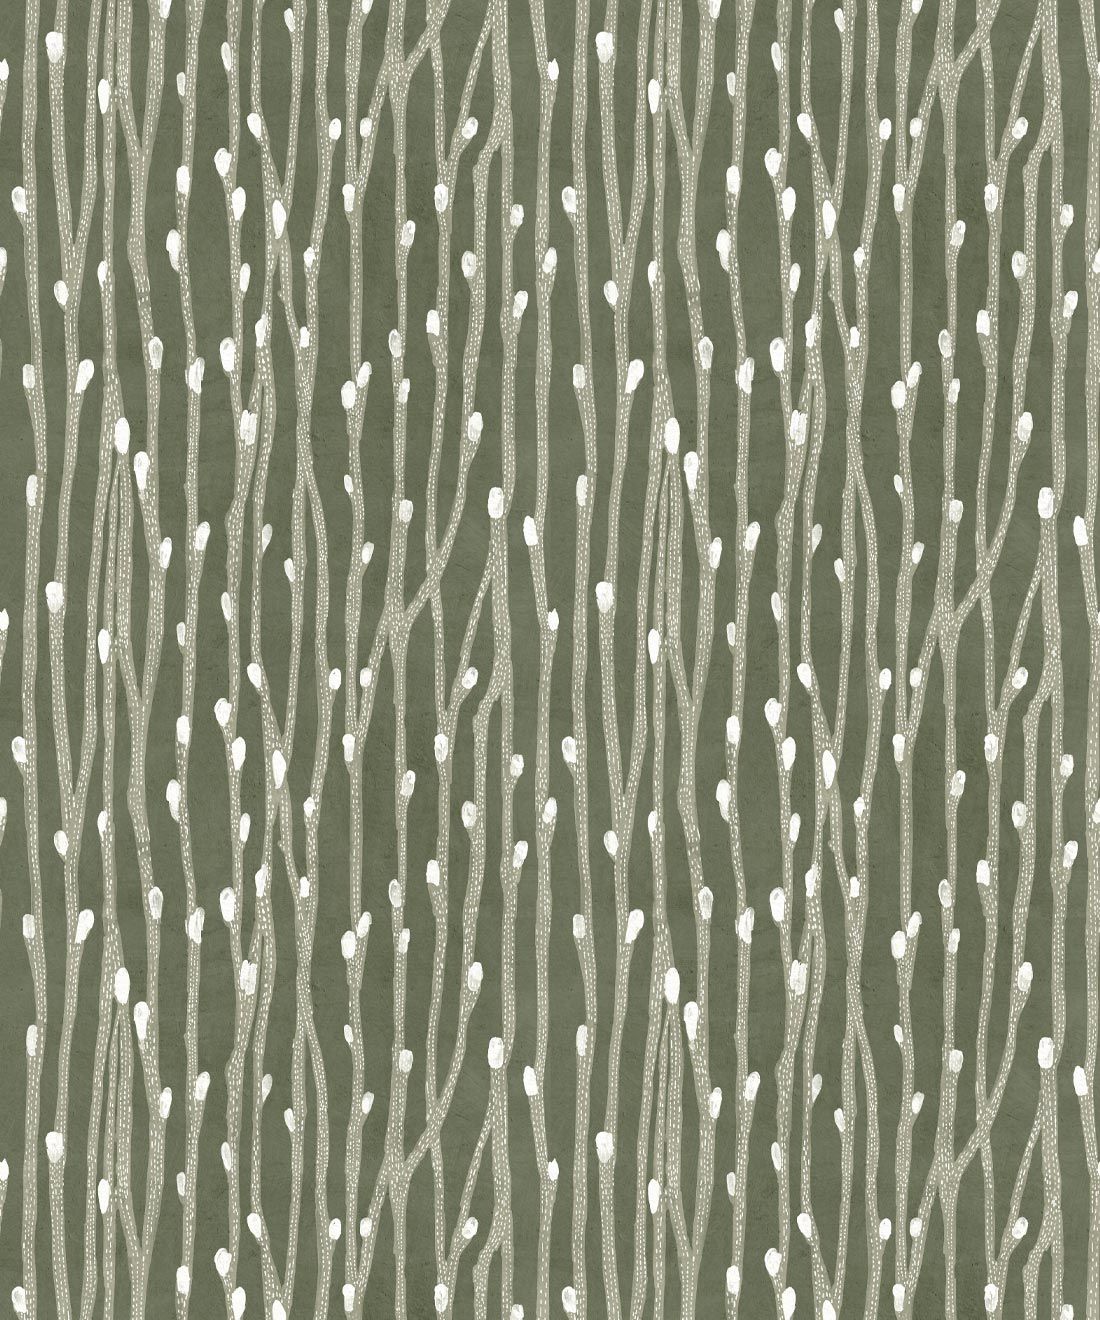 Pussy Willow Wallpaper • Abstract Botanical Wallpaper • Evergreen• Swatch